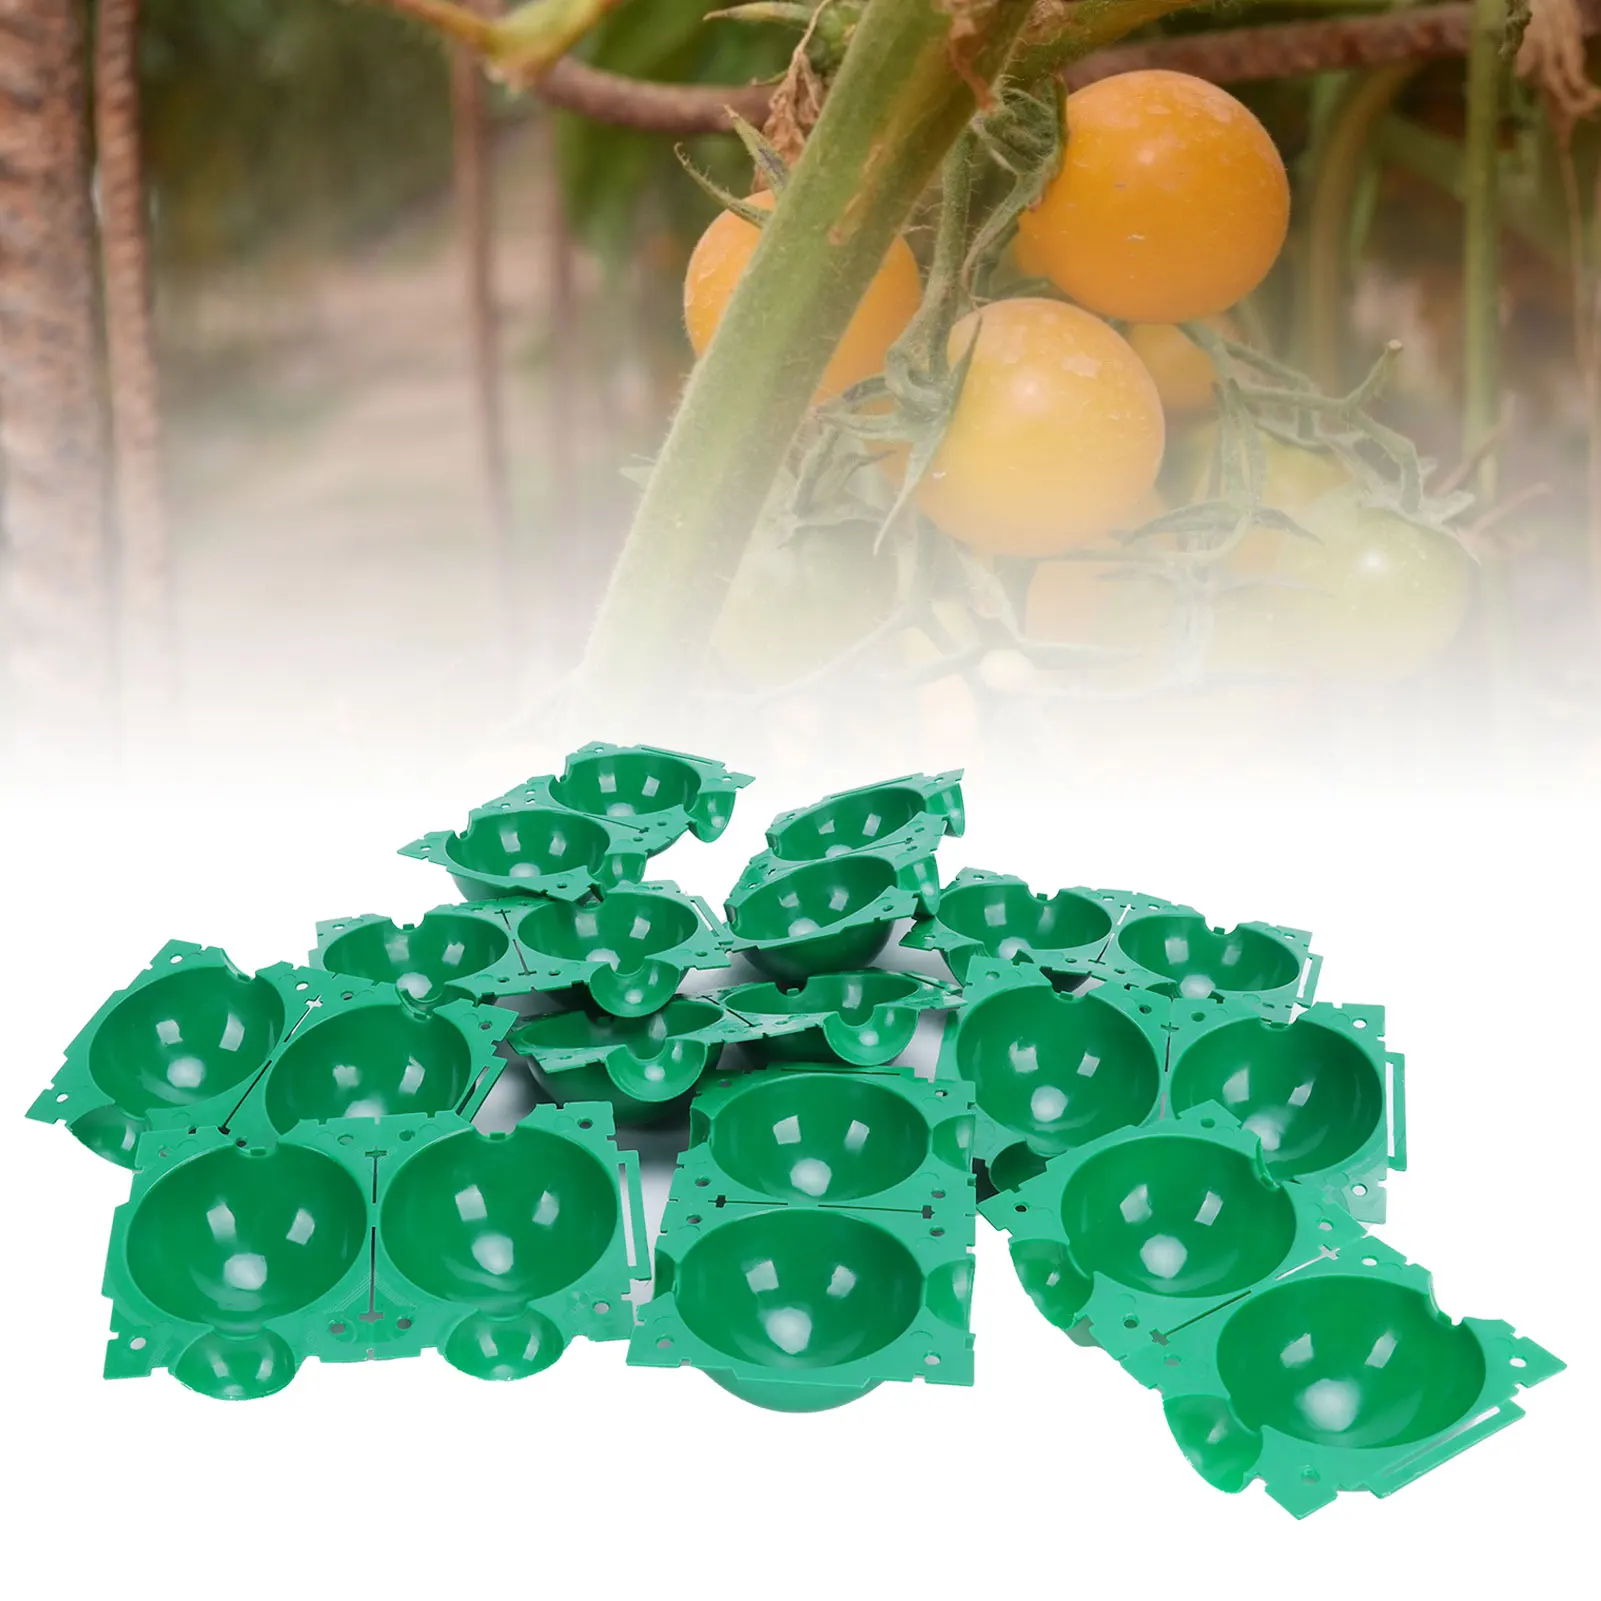 10pcs Reusable Plant Rooting Ball Plant Propagation Device High Pressure Root Growing Ball Box Plant Grafting Pots Green plant rooting ball grafting rooting growing box breeding case for garden plant high pressure propagation box sapling new